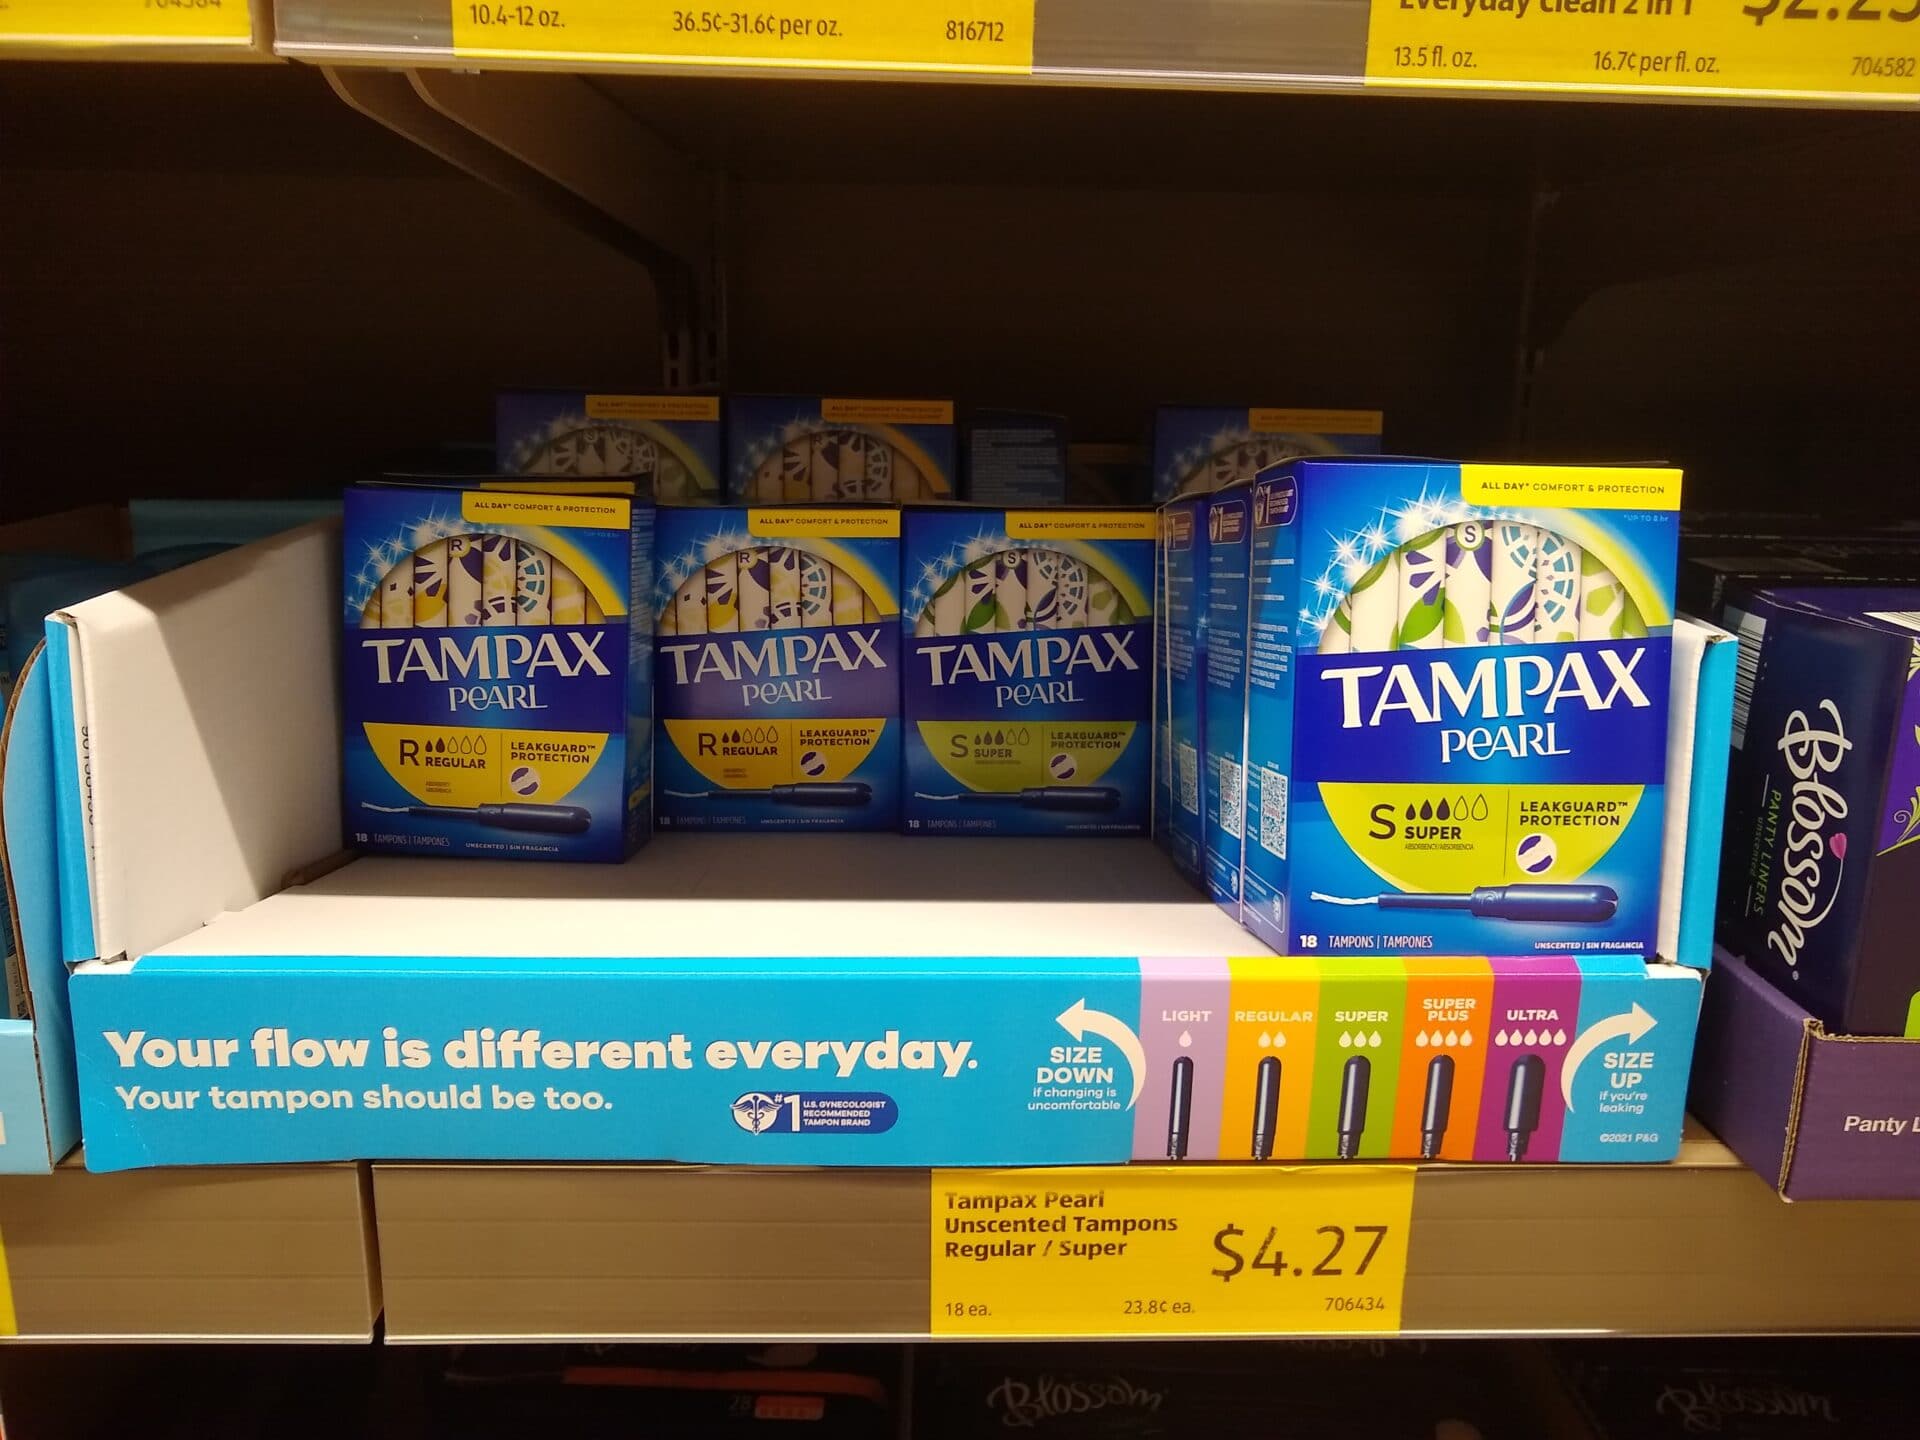 Aldi Affected by the Tampon Shortage? ALDI REVIEWER